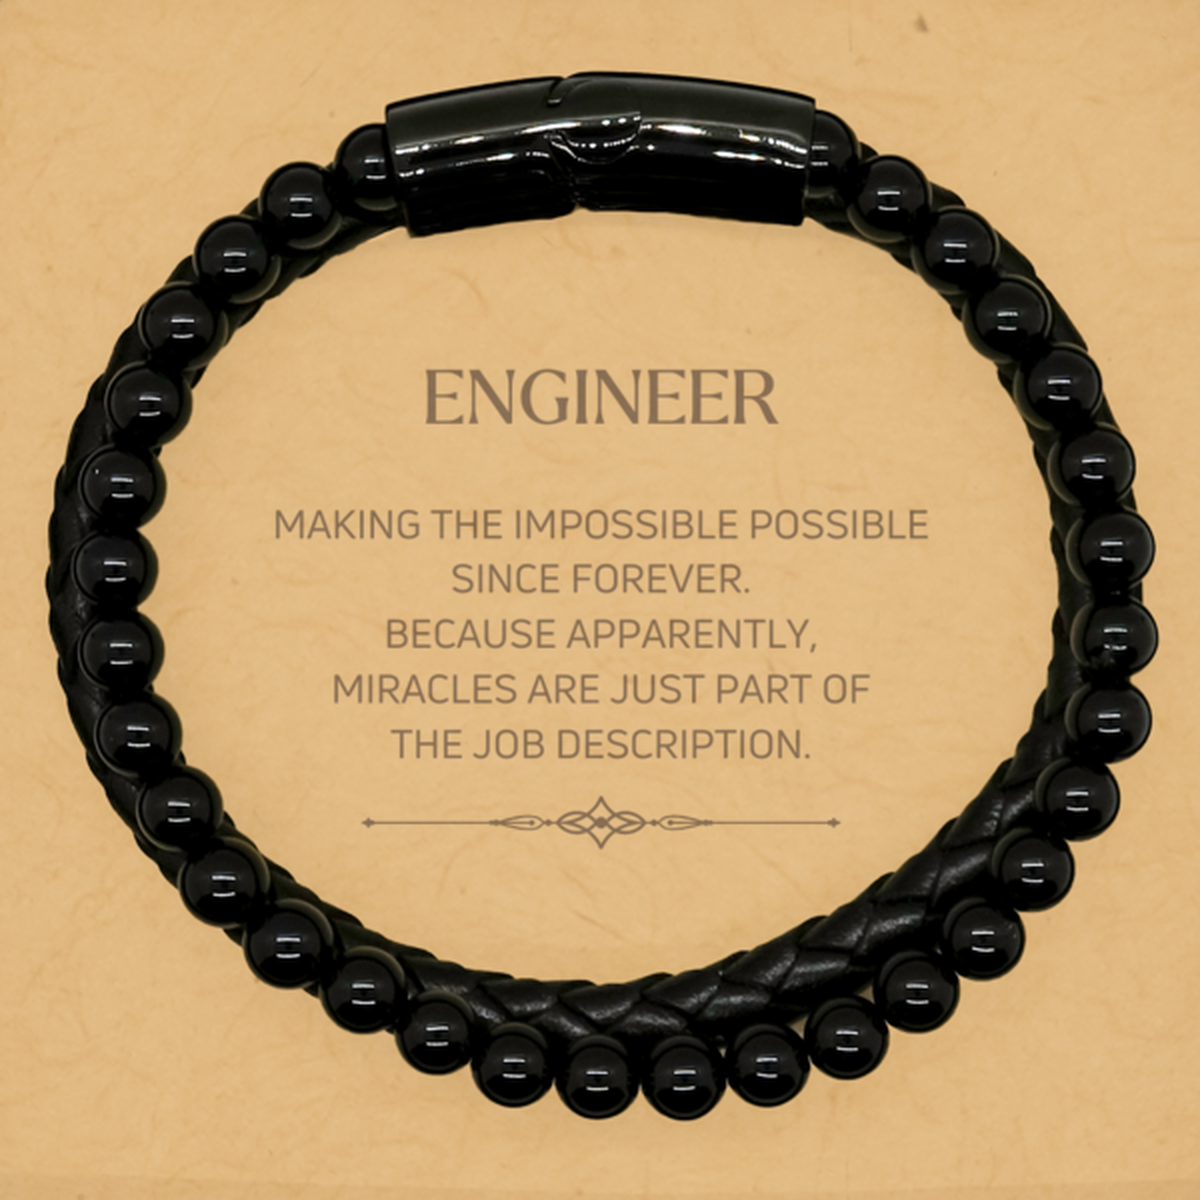 Funny Engineer Gifts, Miracles are just part of the job description, Inspirational Birthday Stone Leather Bracelets For Engineer, Men, Women, Coworkers, Friends, Boss